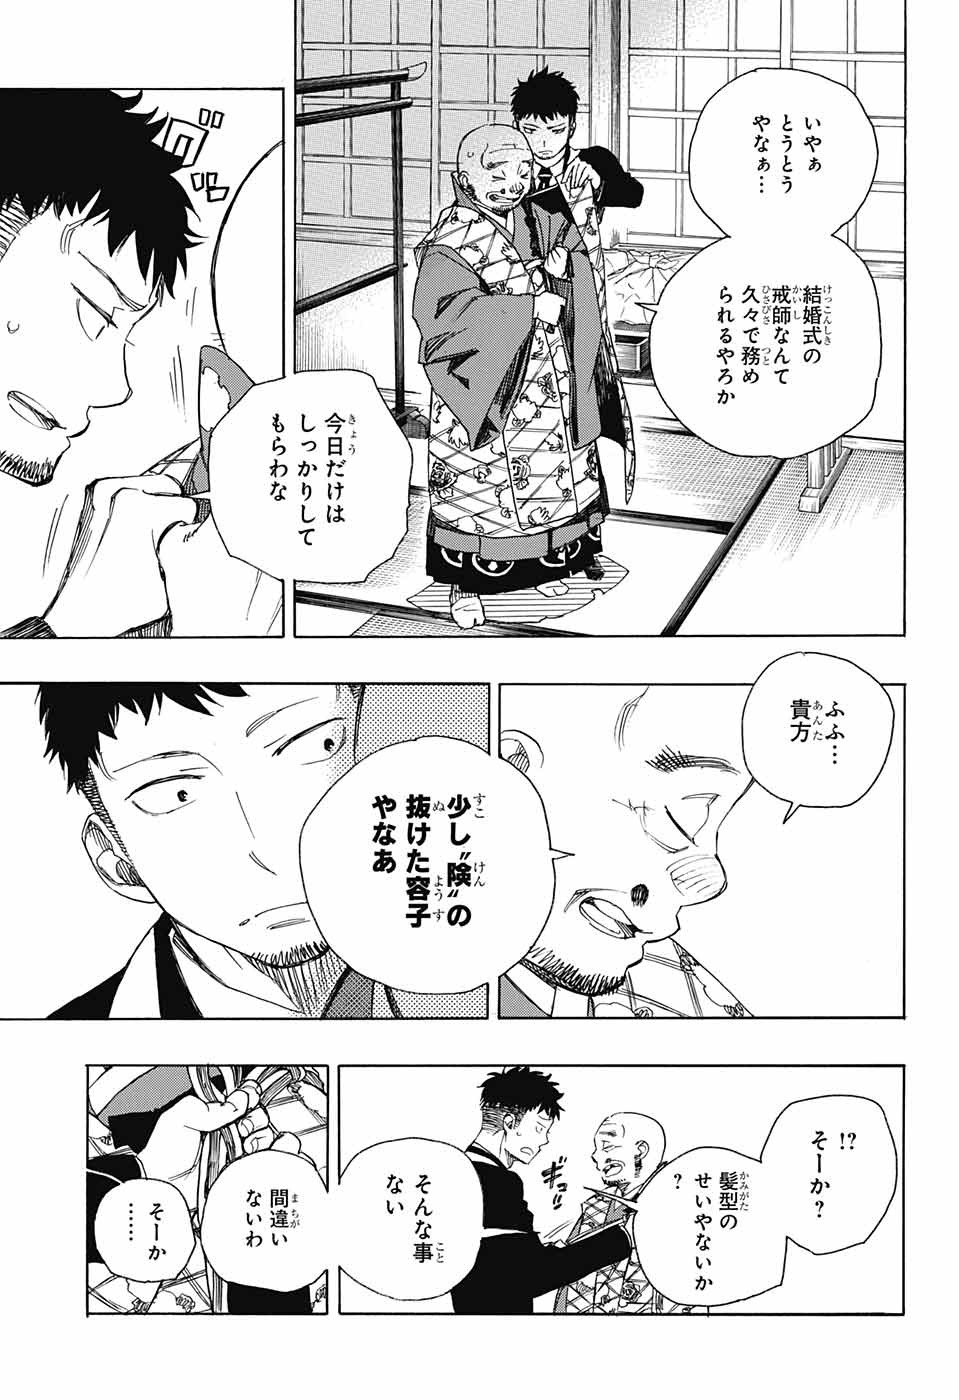 Ao no Exorcist - Chapter 91 - Page 3